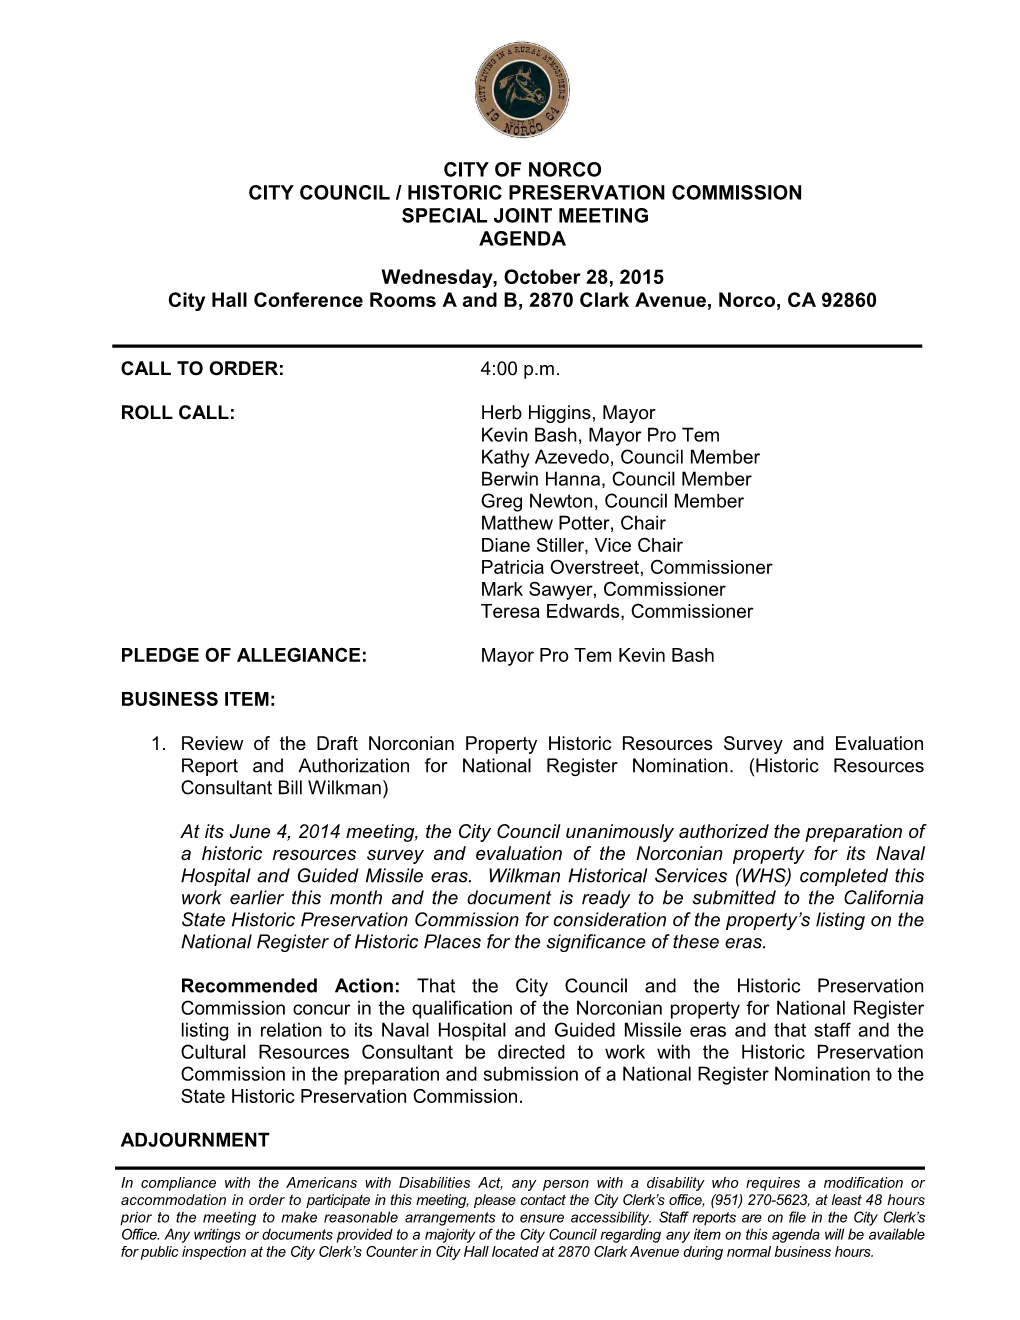 City Council/Historic Preservation Special Joint Meeting